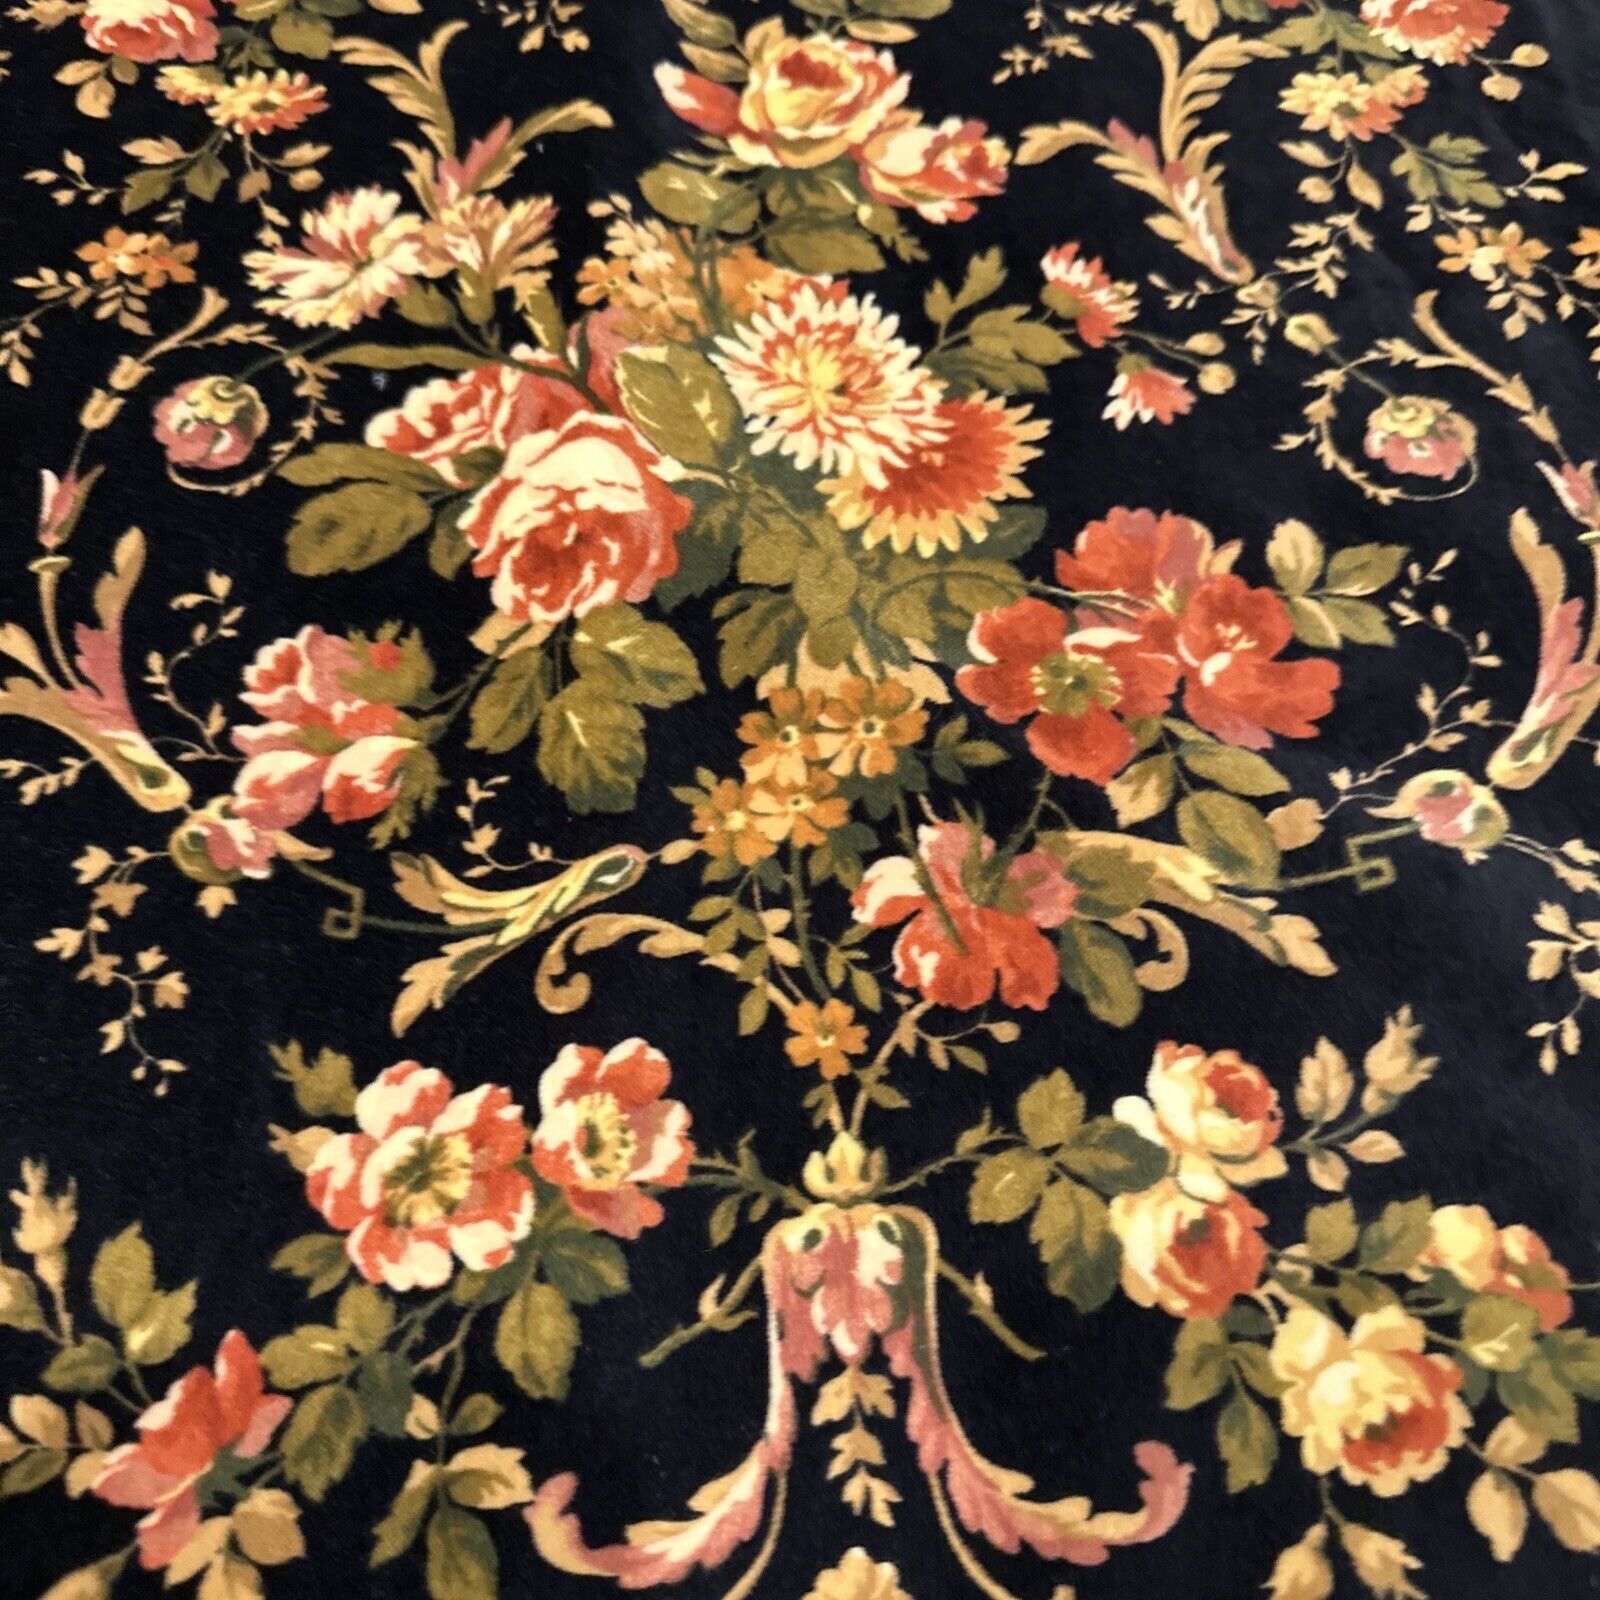 Rare Floral Cotton Velvet Lined Curtains Vintage Fabric Approx. 6 Yards Gorgeous